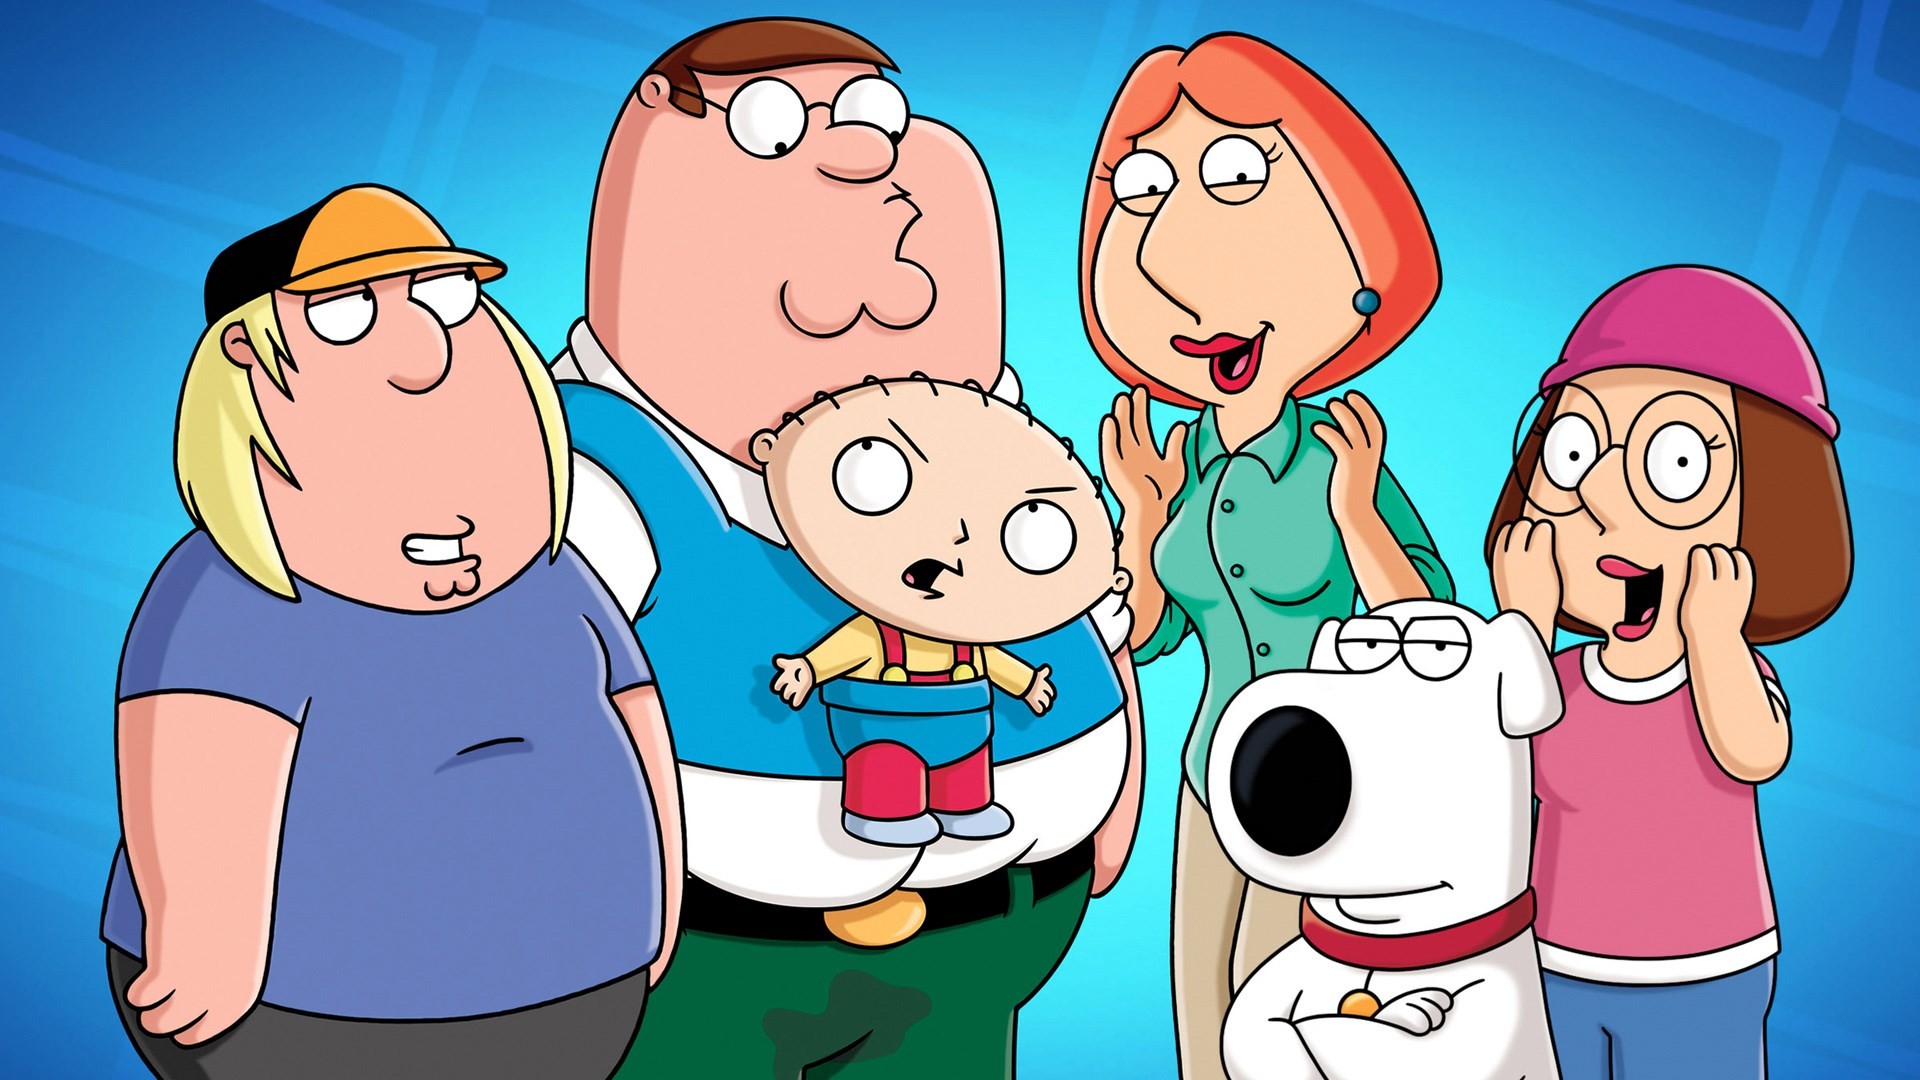 1920x1080 free computer wallpaper for family guy - family guy category